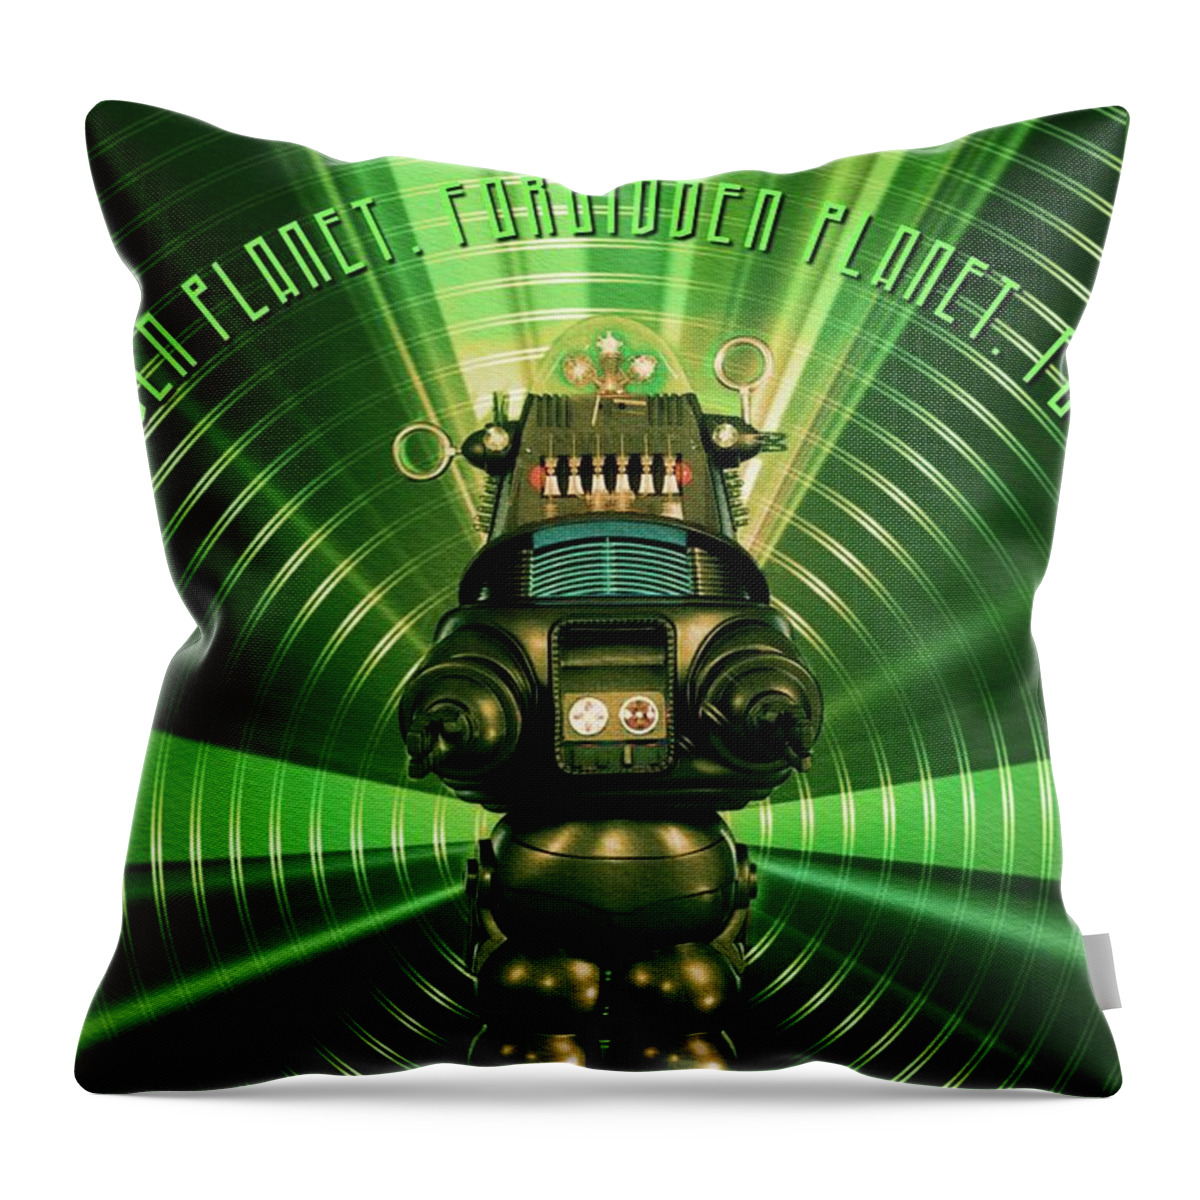 Robbie Throw Pillow featuring the digital art Robbie The Robot - Forbidden Planet by Esoterica Art Agency